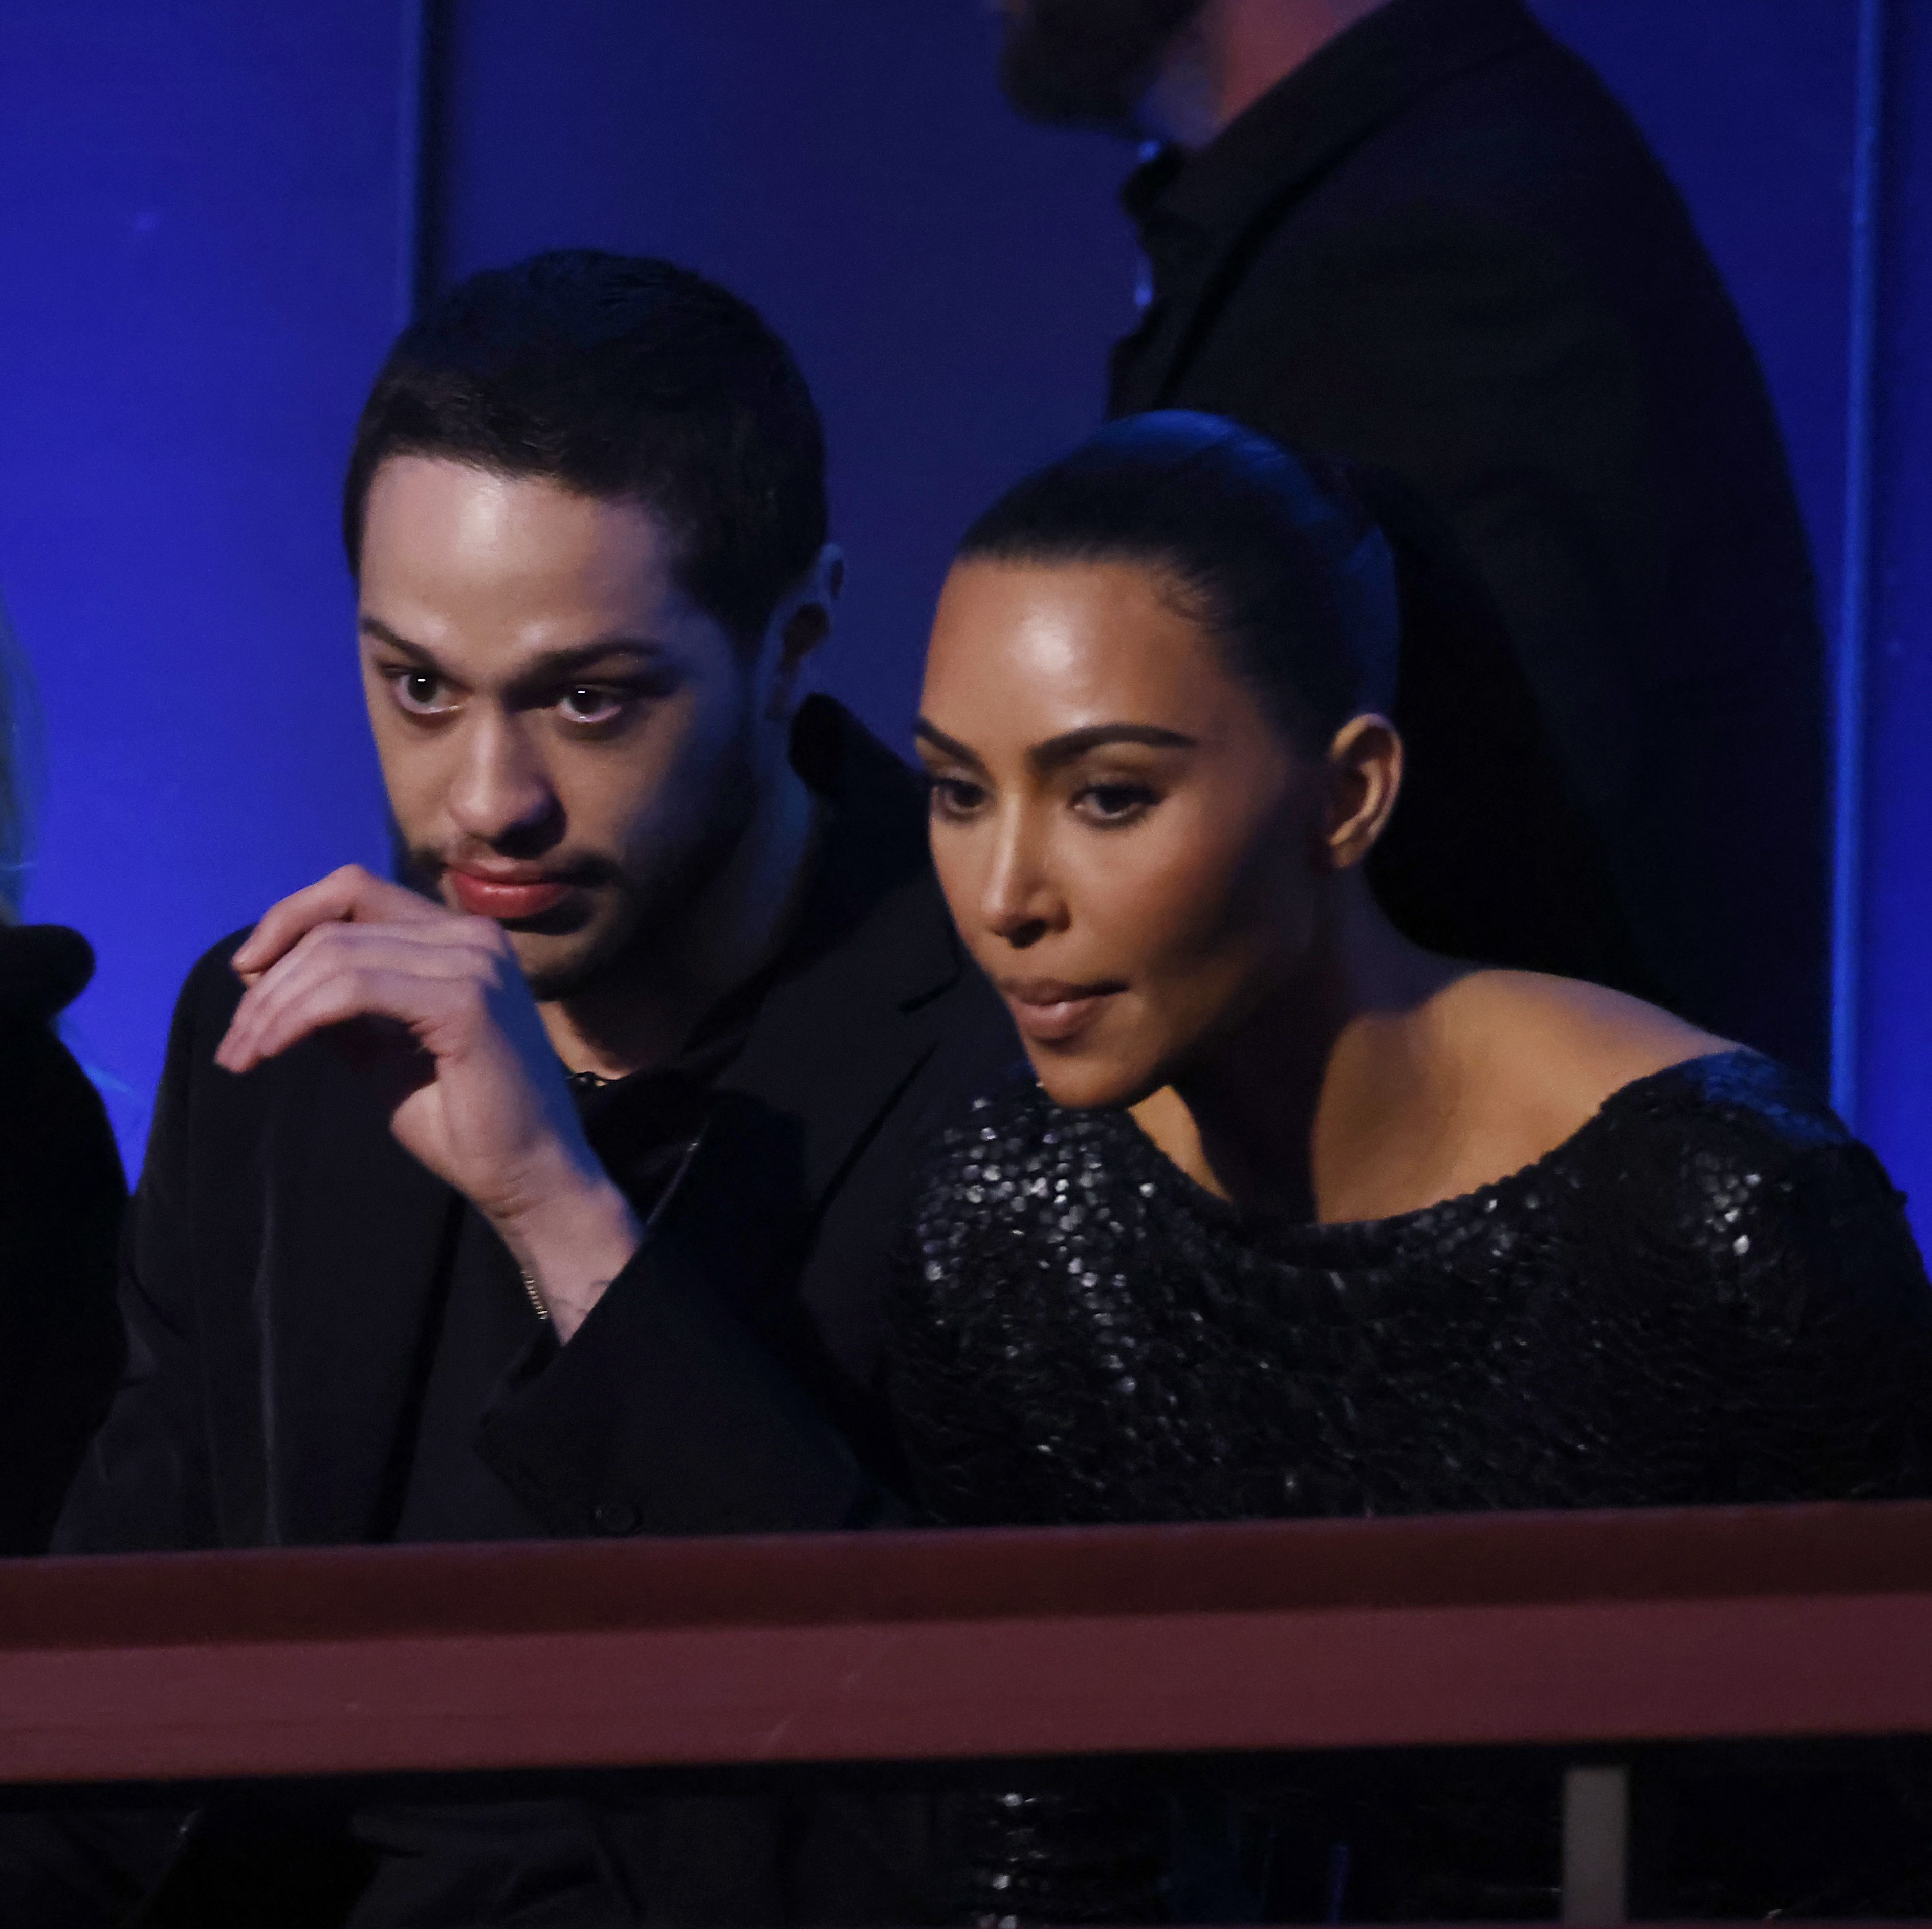 Pete Davidson and Kim Kardashian Made a Rare Public Appearance Together and Were Photographed